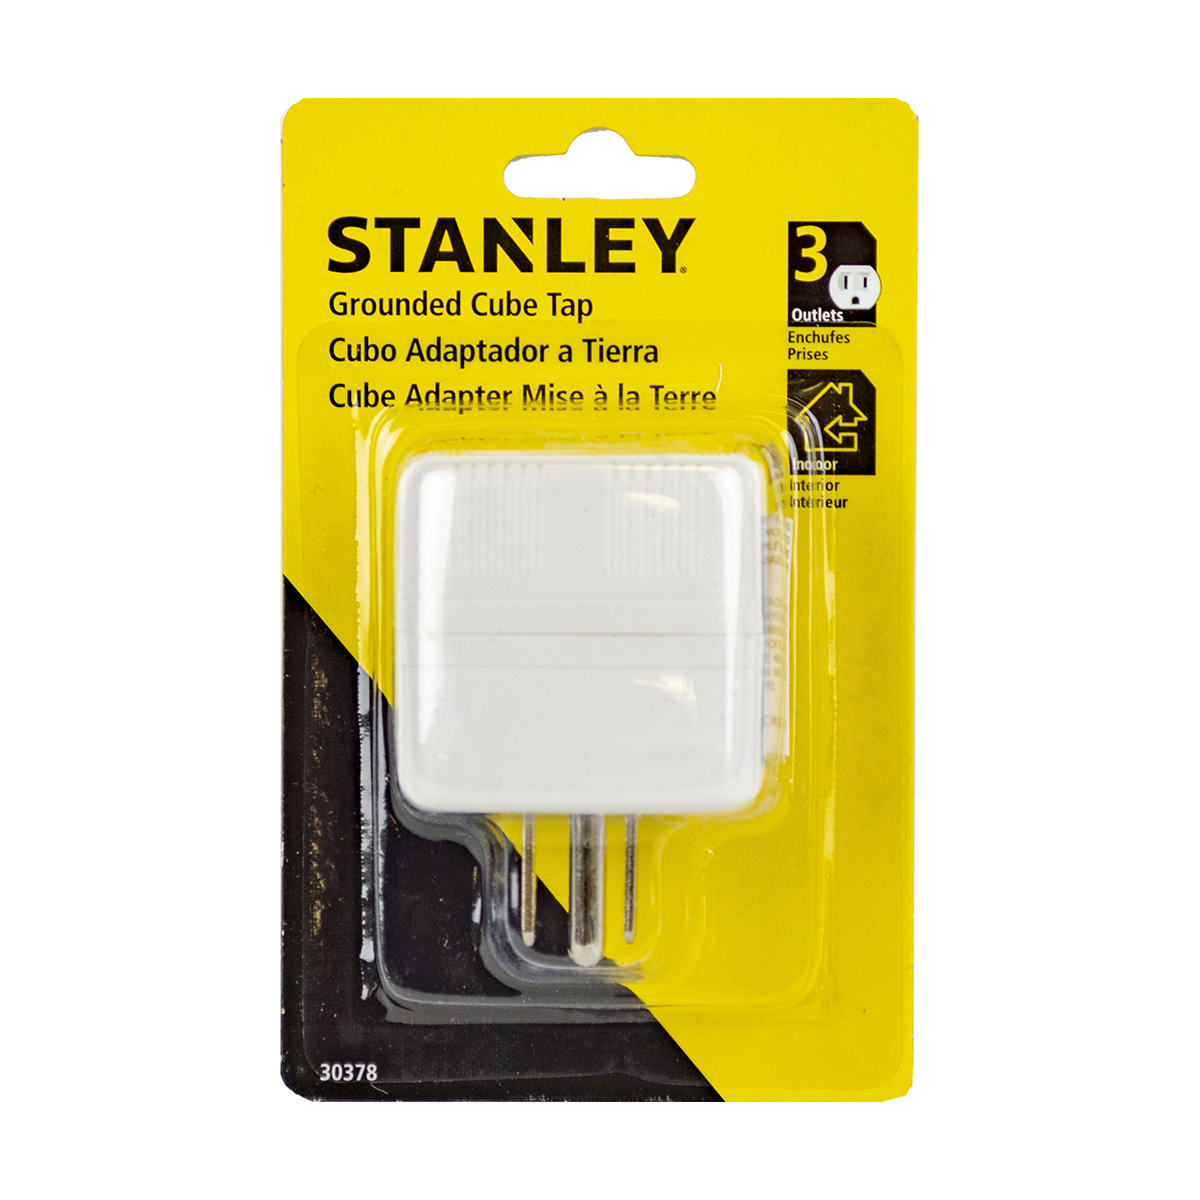 Stanley Grounded Cube Tap 